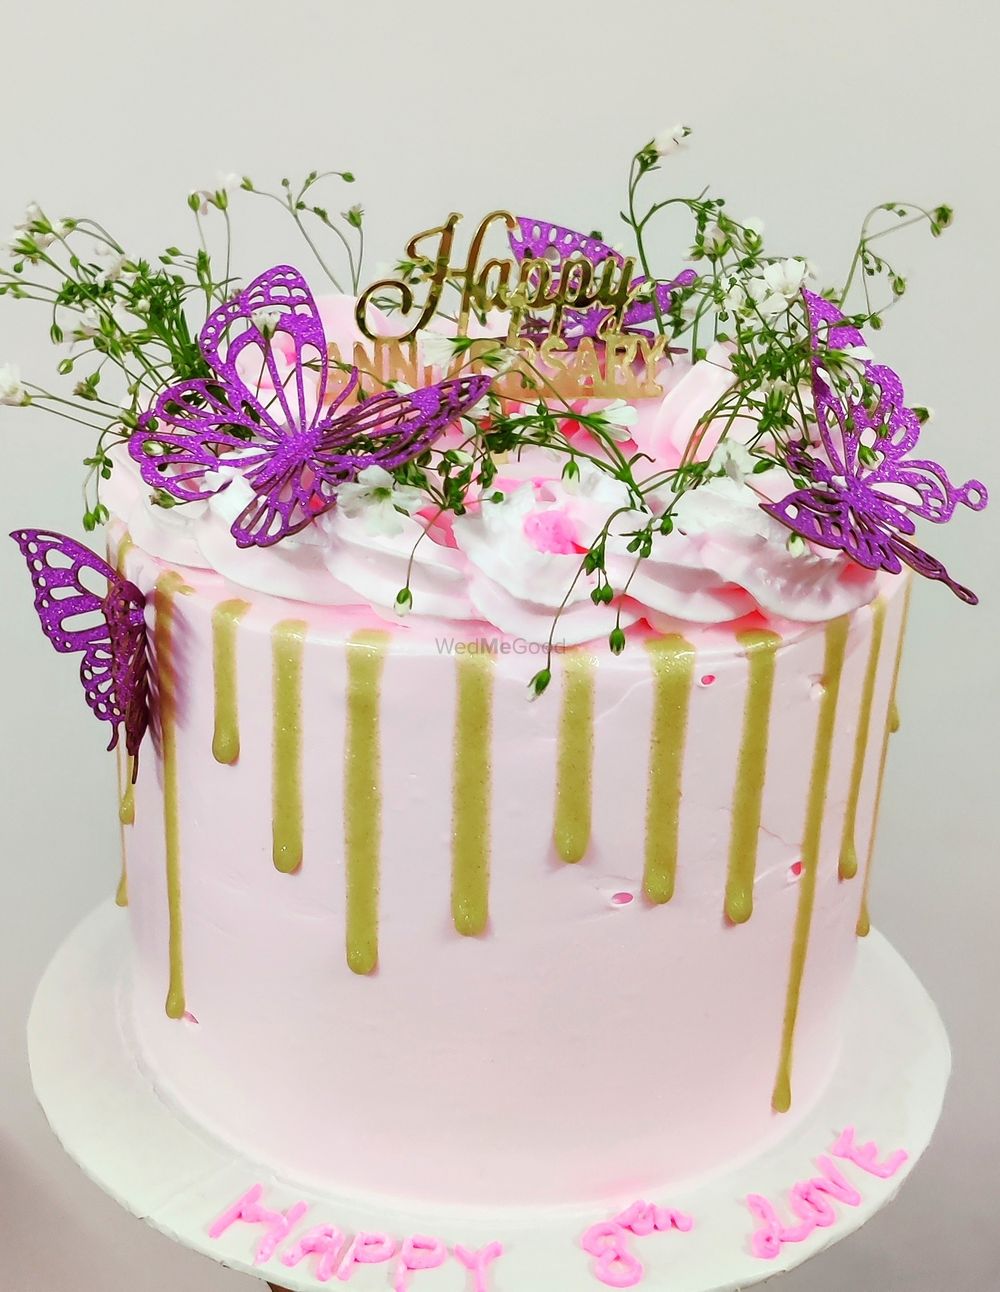 Photo From Cakes for her - By The Whiskology